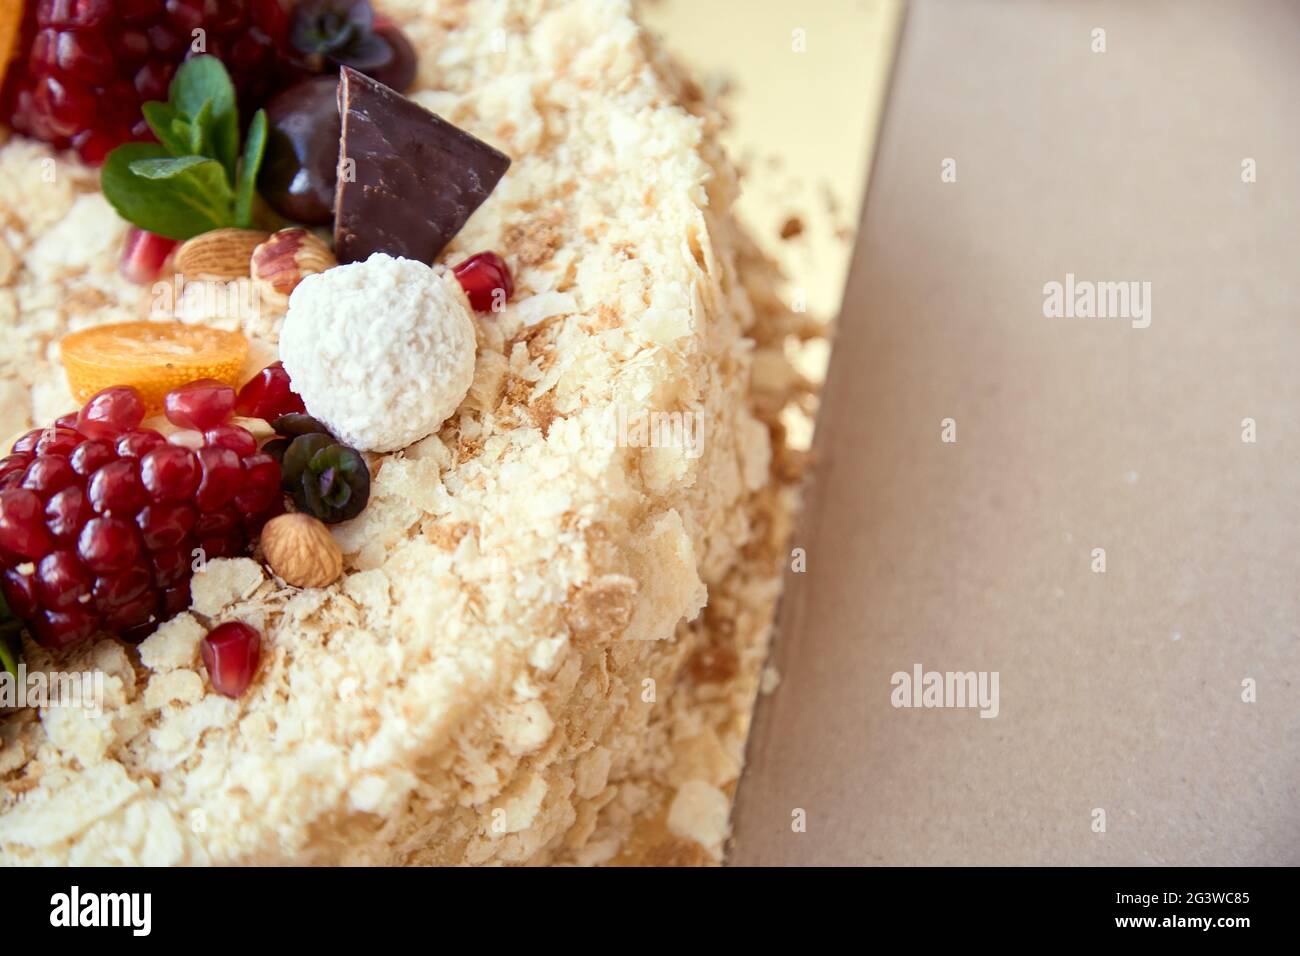 Happy birthday concept. Festive cake decorated with fruits and sweets with copy space Stock Photo